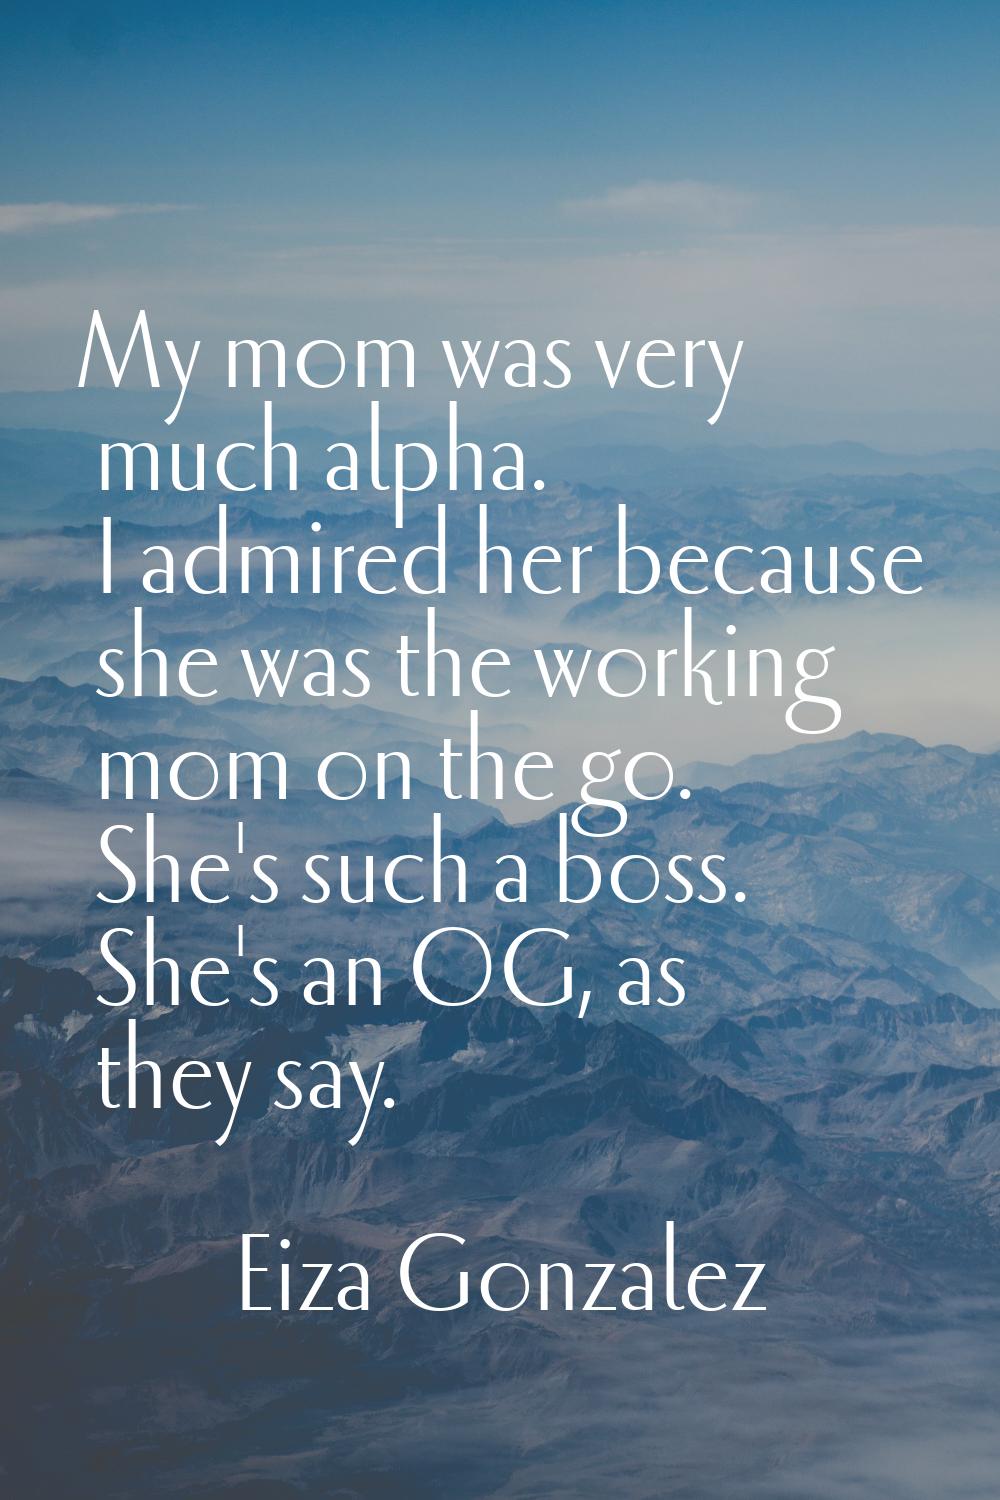 My mom was very much alpha. I admired her because she was the working mom on the go. She's such a b